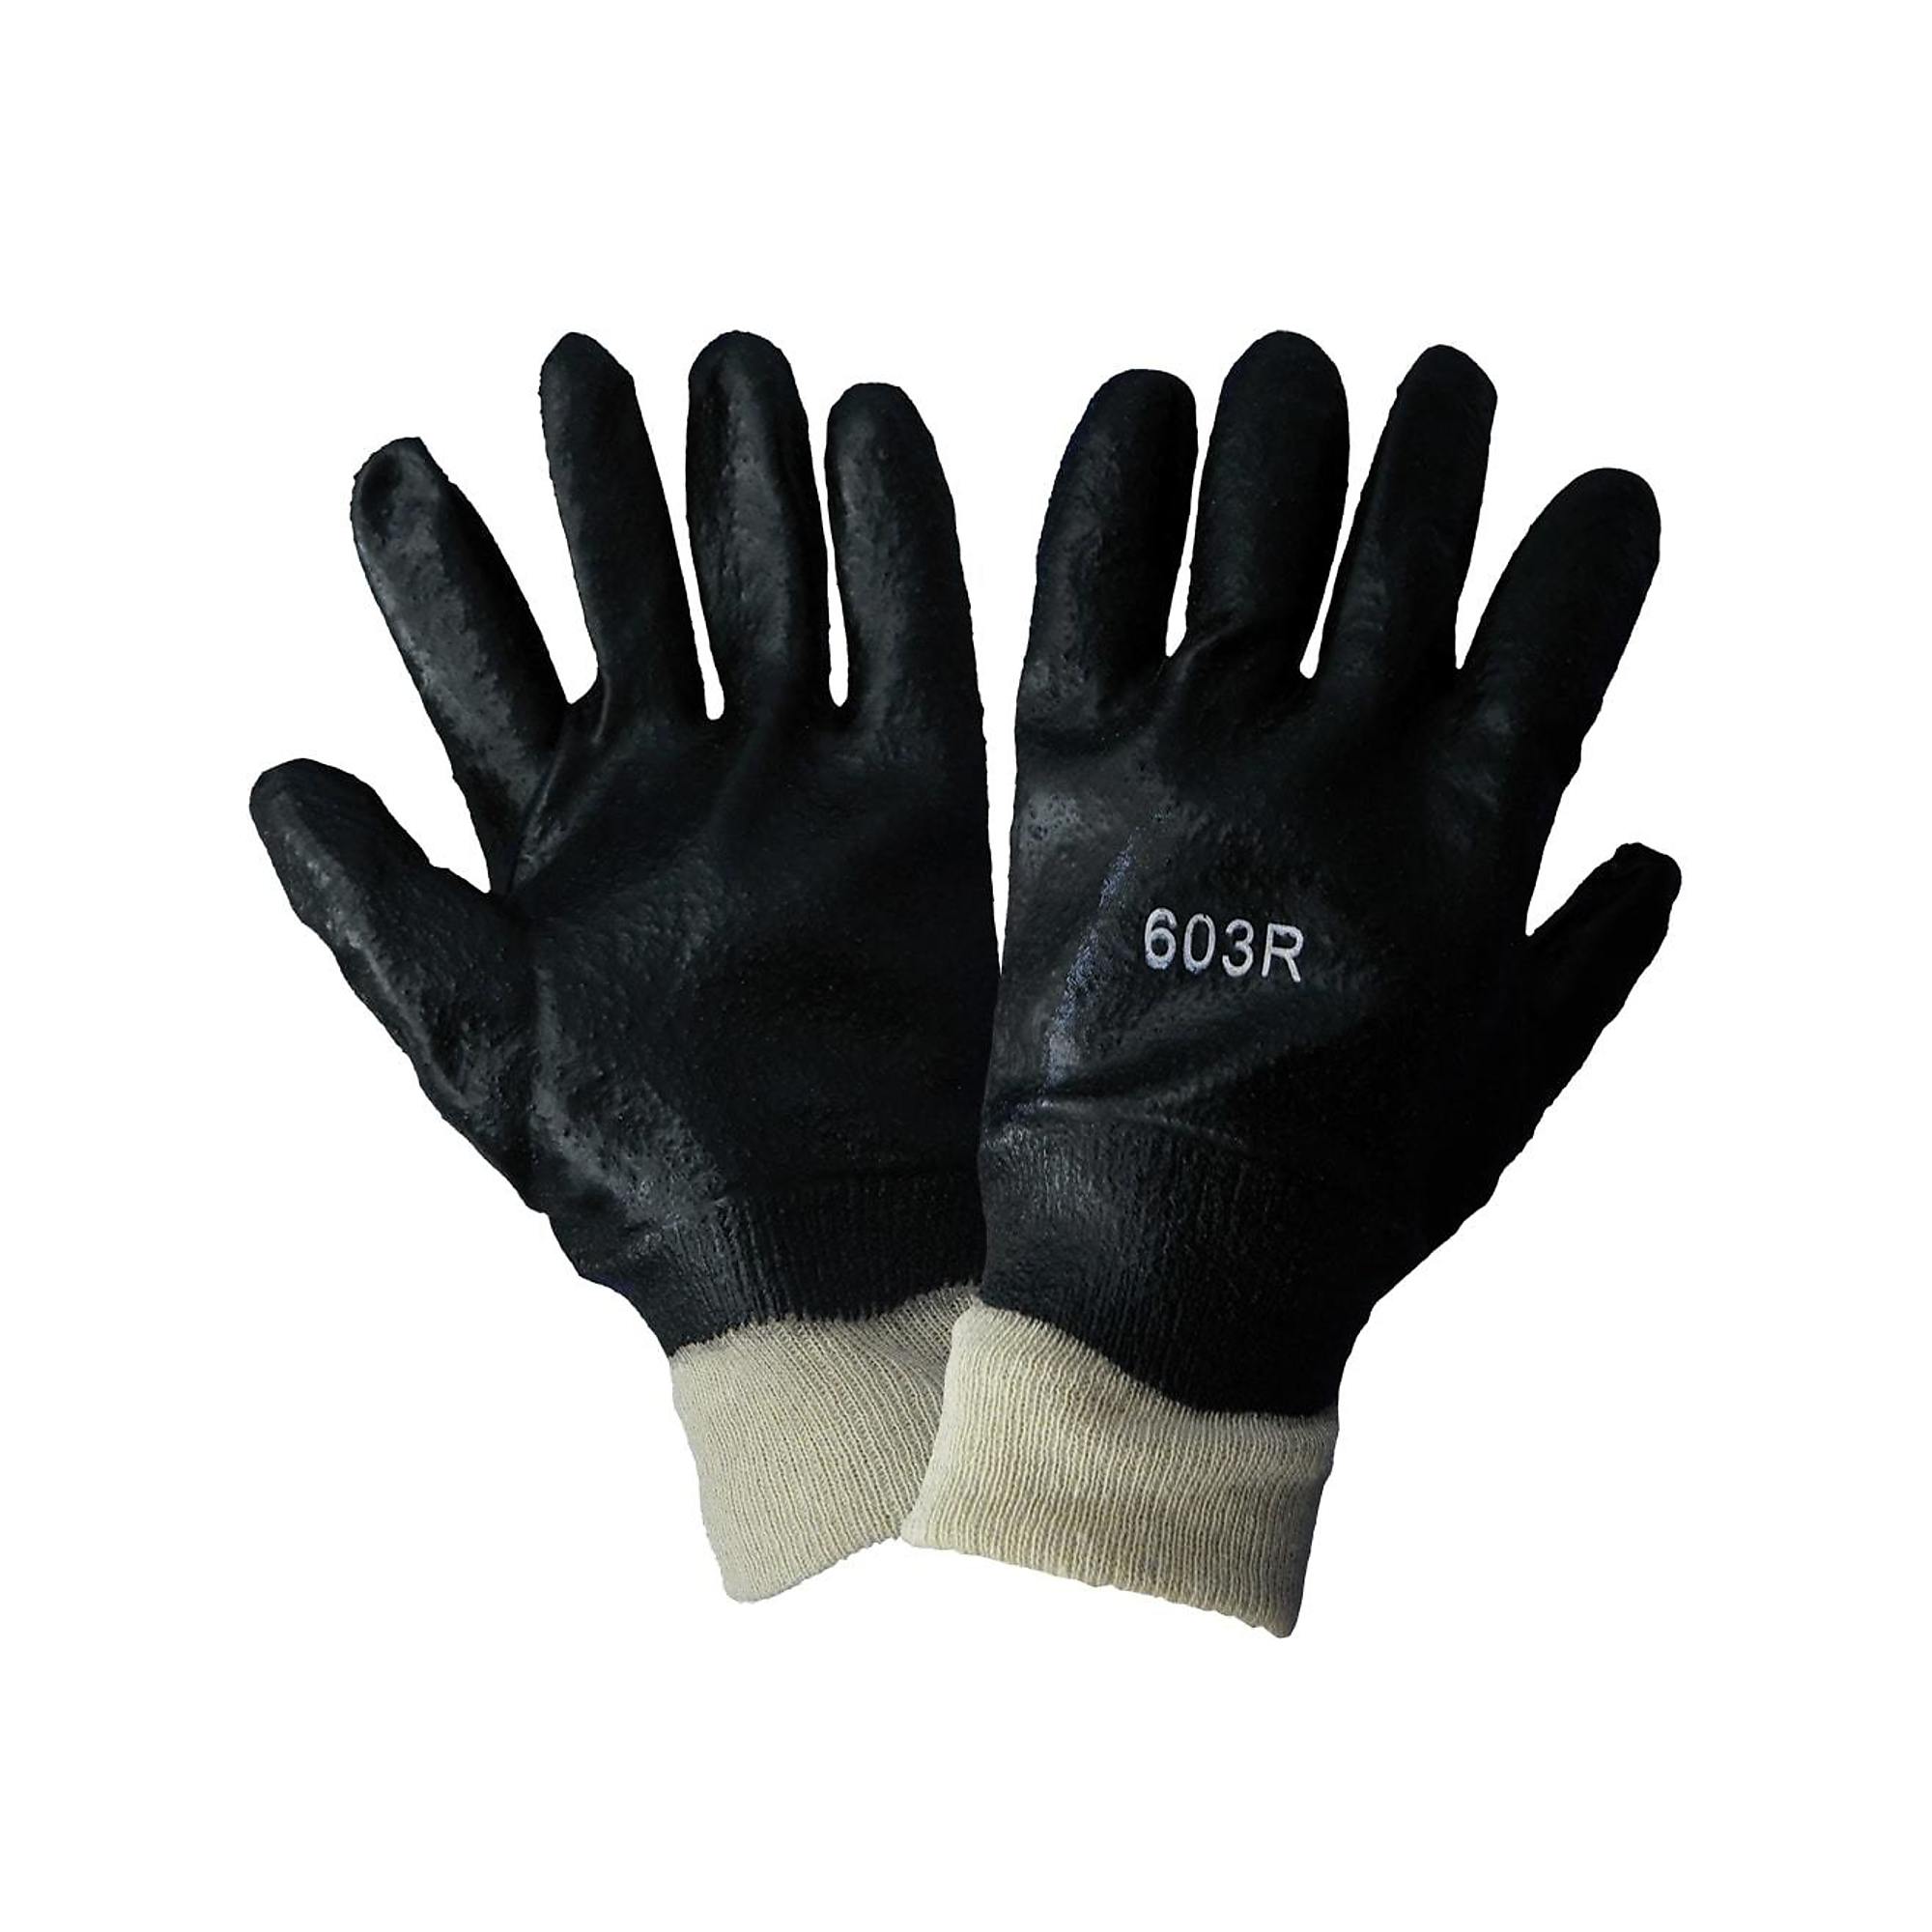 Global Glove, Black PVC, Cotton Liner, Solvent Resistant Gloves -12 Pairs, Size One Size, Color Tan/Black, Included (qty.) 12 Model 603R